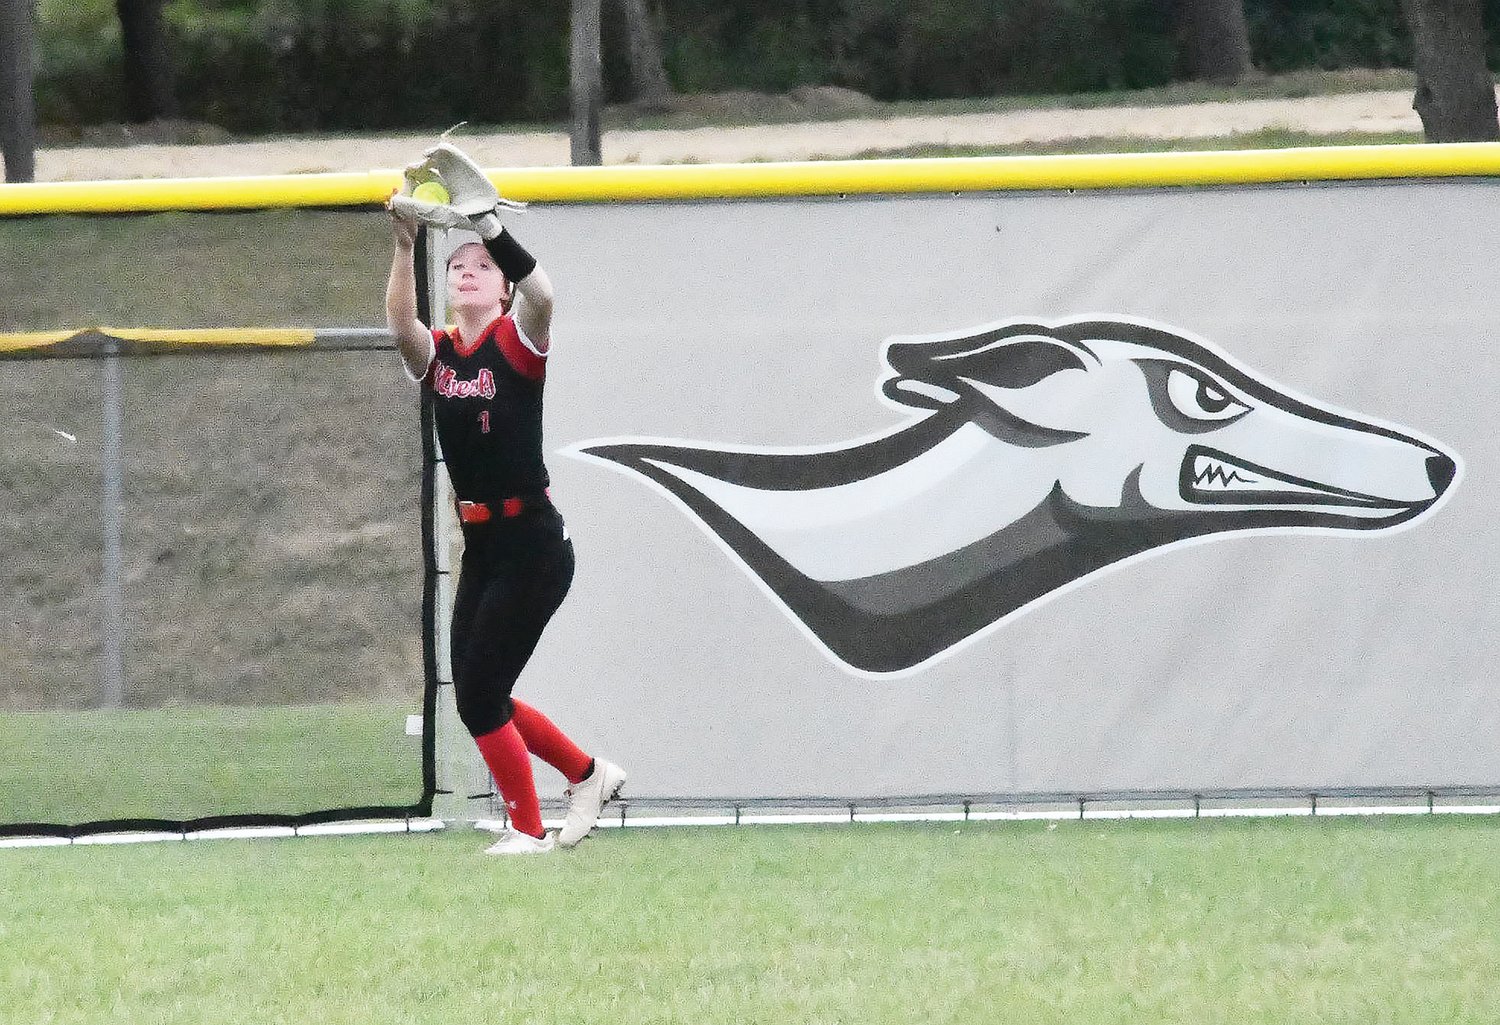 Harper Rollins makes a catch in center field, during last Saturday's doubleheader, in front of recently installed temporary fencing at Hils Athletic Complex.